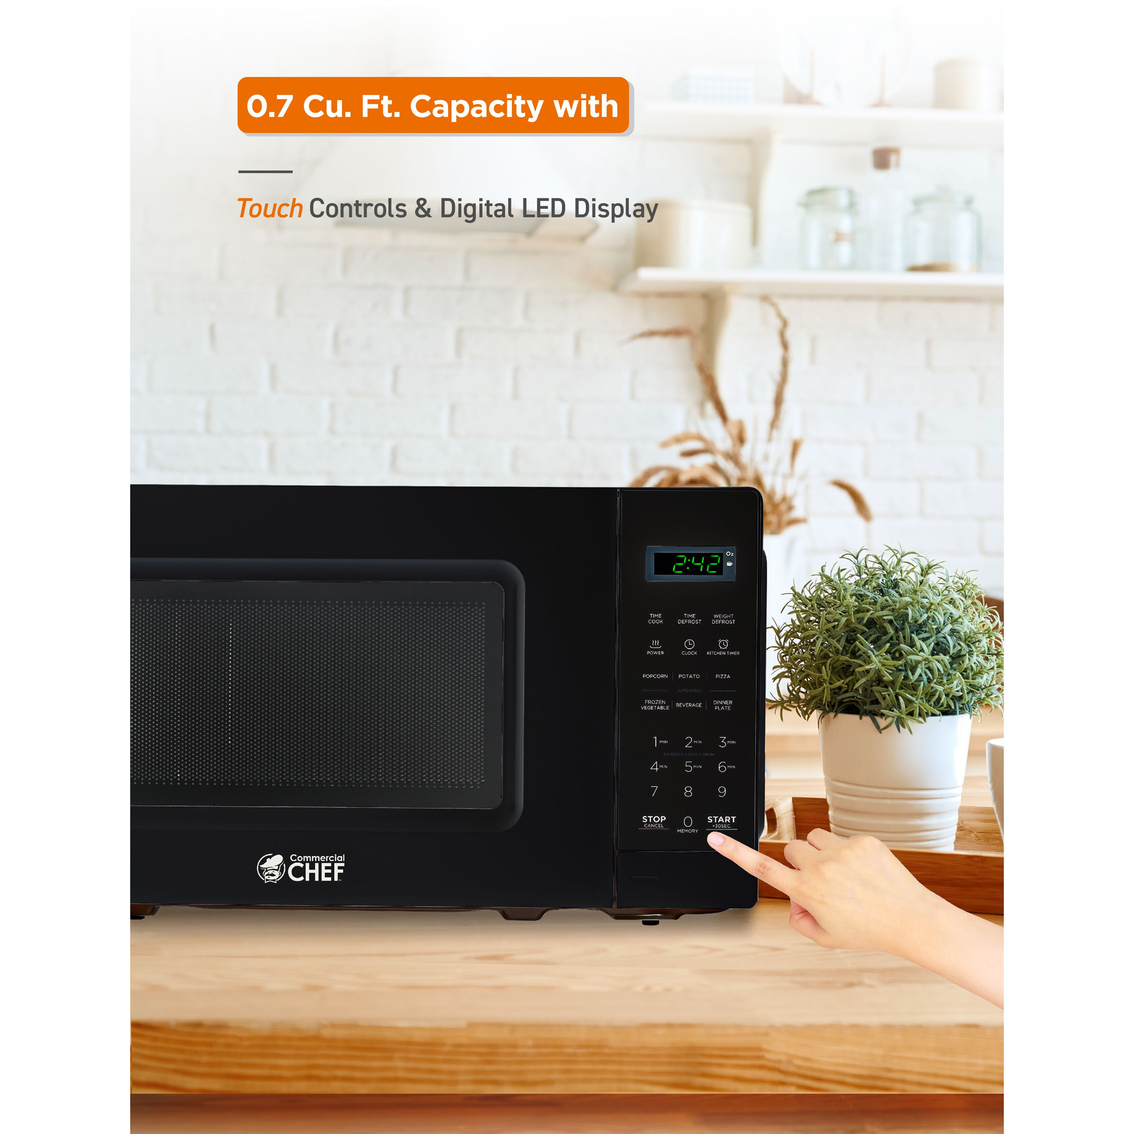 Commercial Chef 0.7 Cu. Ft. Countertop Microwave Oven - Image 6 of 7